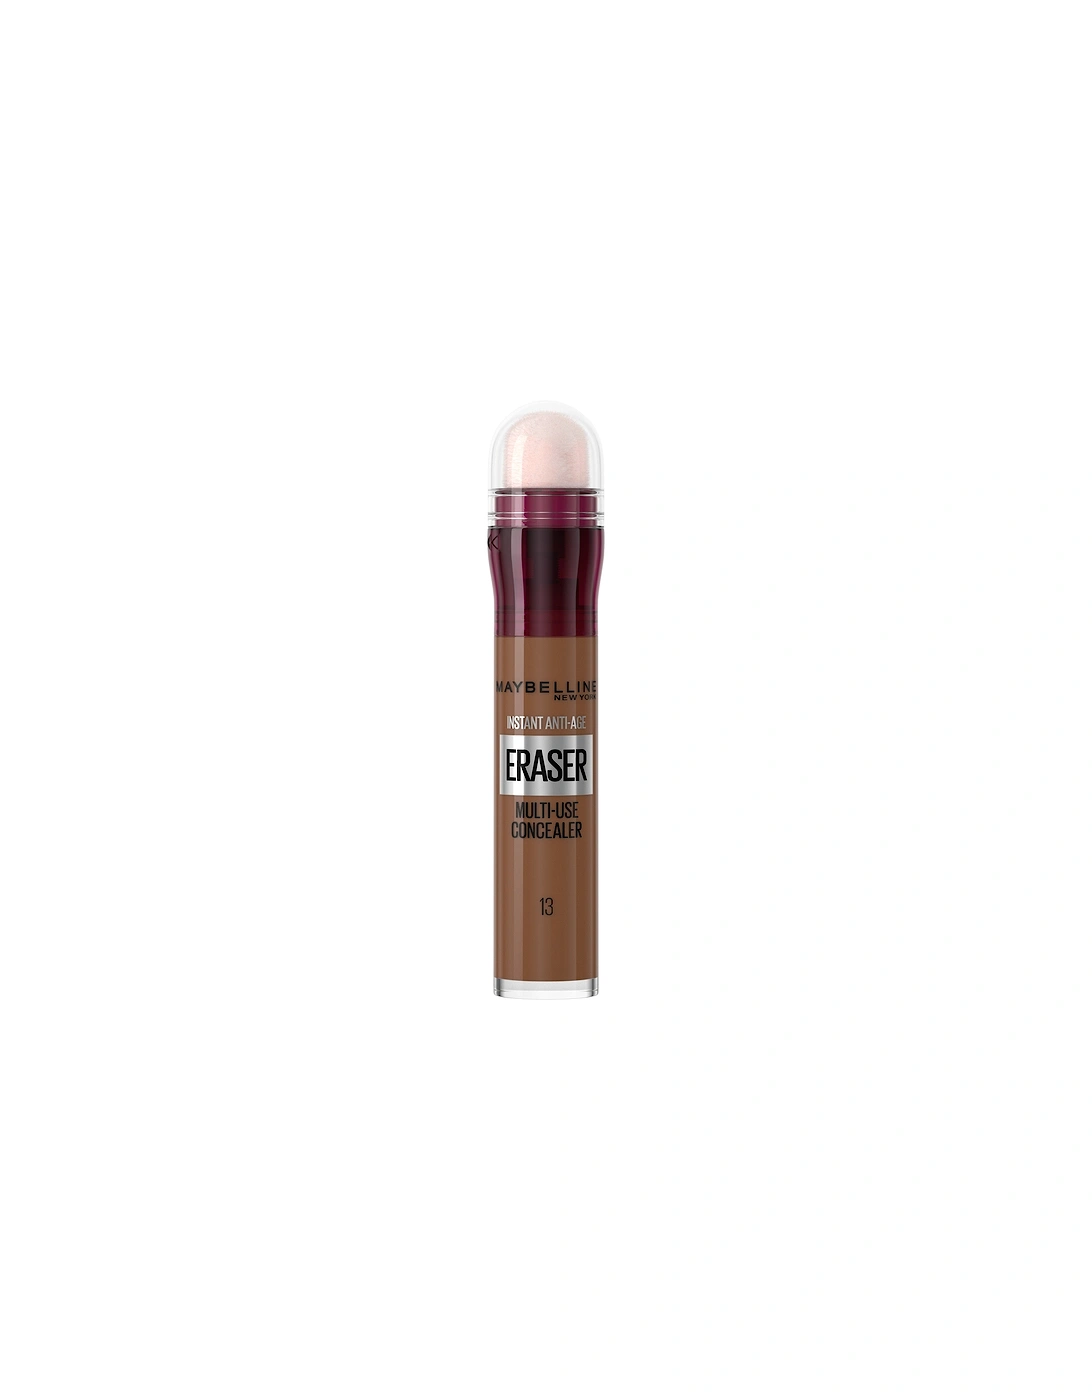 Instant Anti-Age Eraser Concealer - 13 Cocoa - Maybelline, 2 of 1